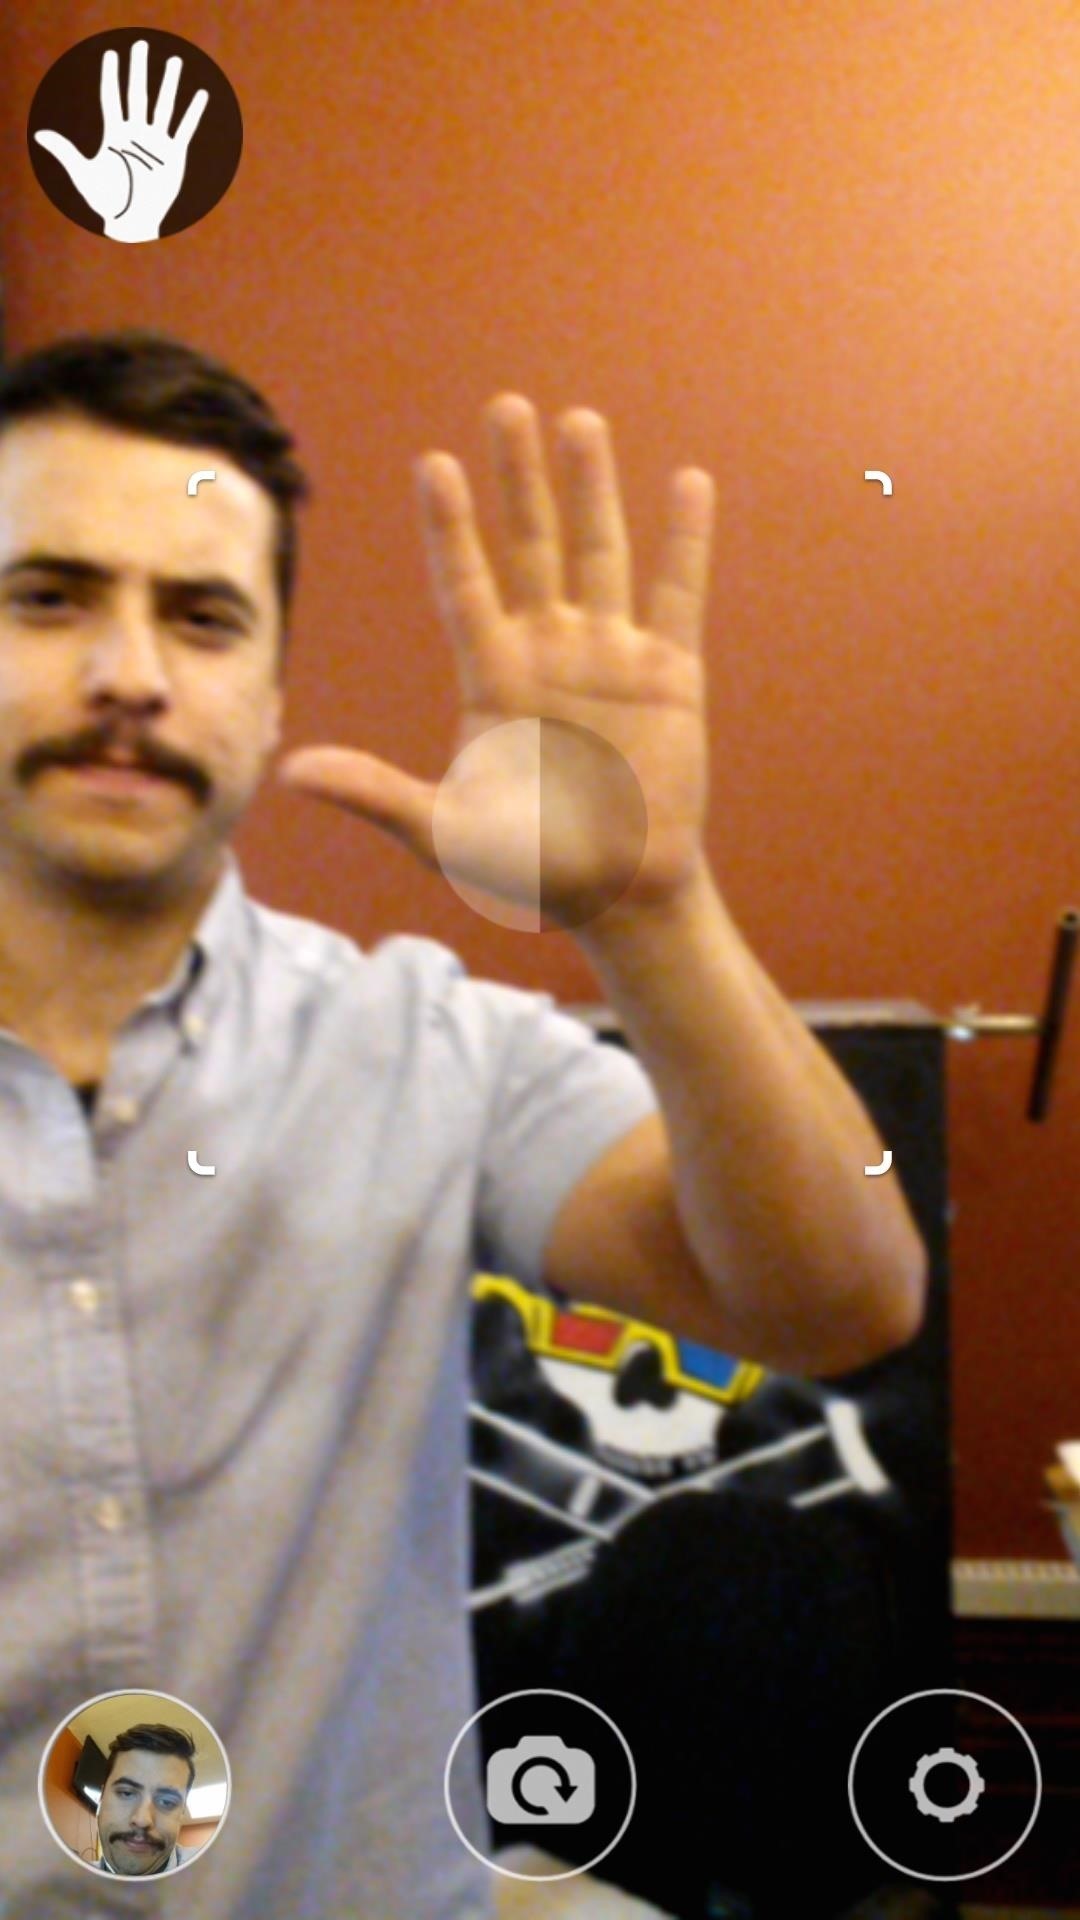 Use Hand Gestures to Take Selfies More Easily on Android